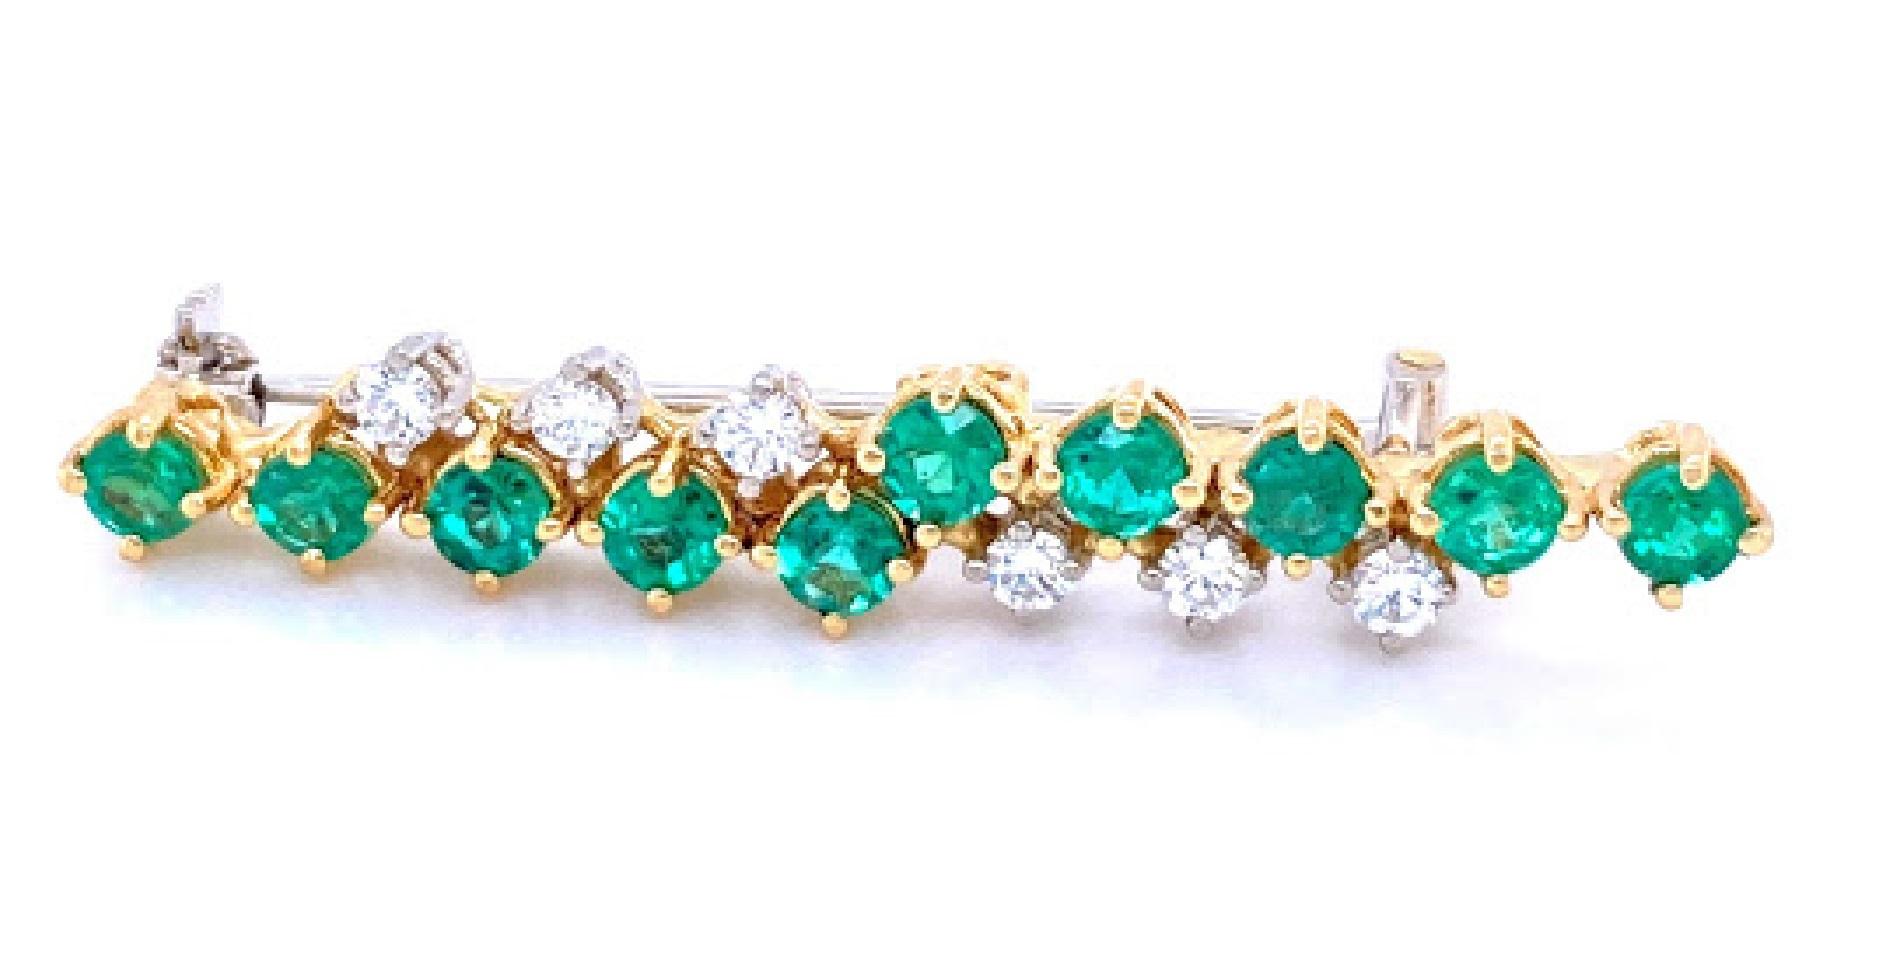 18 karat white and yellow (stamped 18k) gold pin. The pin features 10 round cut emerald stones measuring 3.25 mm, weighing approximately 0.75 carat total weight. With 6 round cut diamonds that are in the H-I color range and the SI clarity range,